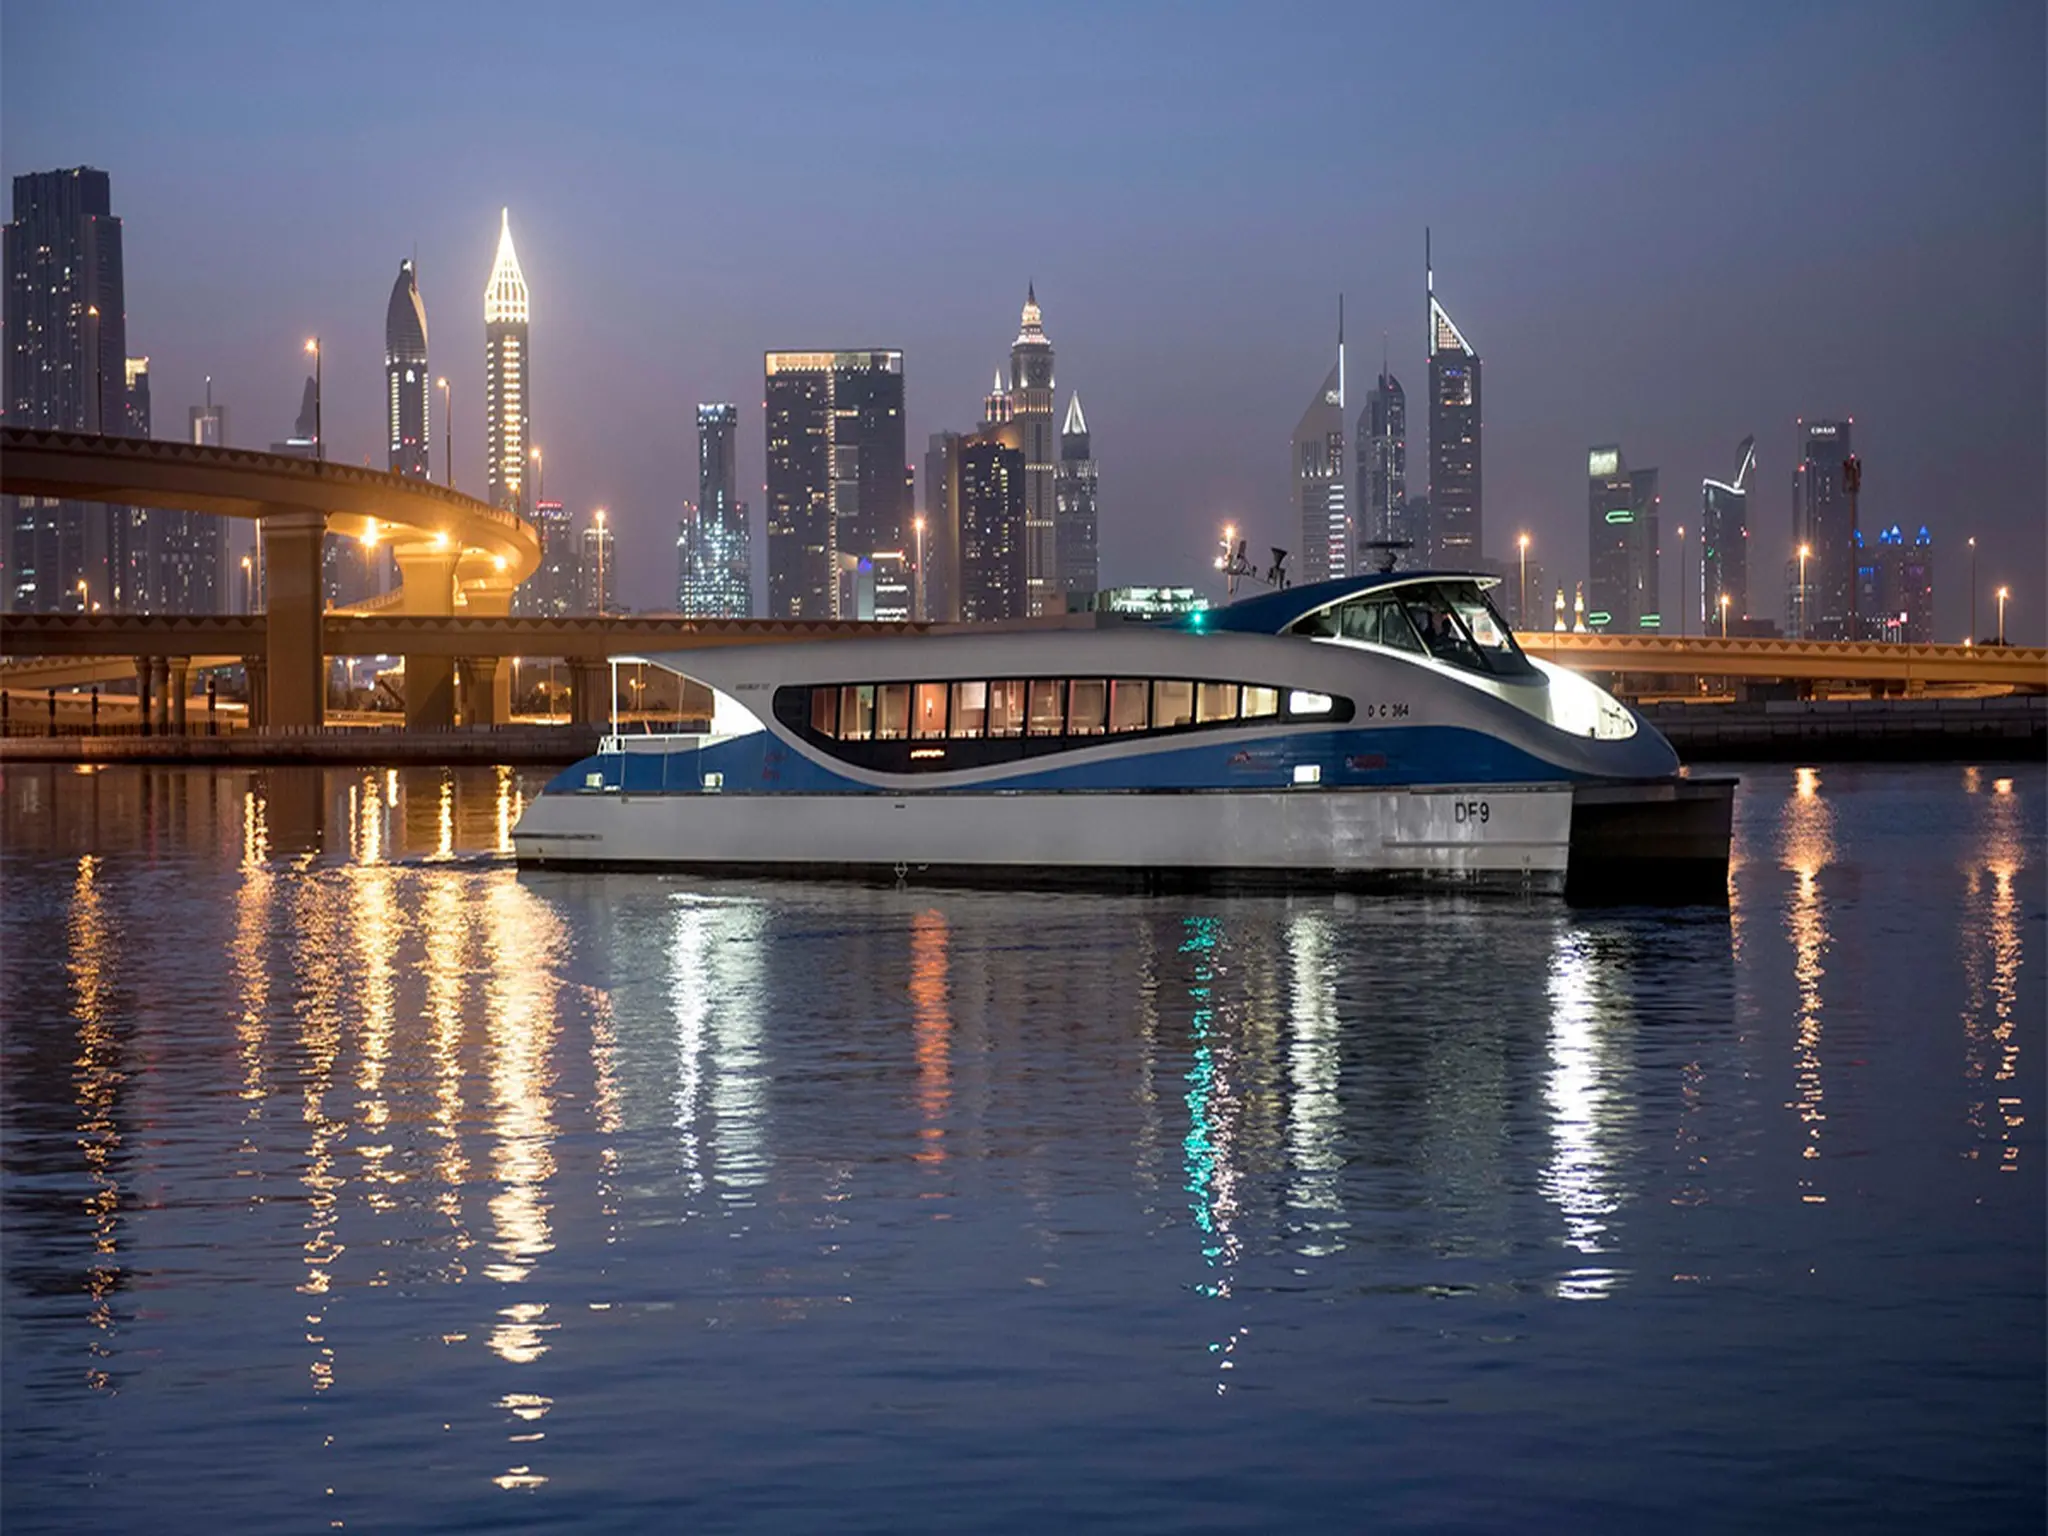 The Dubai-Sharjah Ferry is returning, and tickets start at AED 15